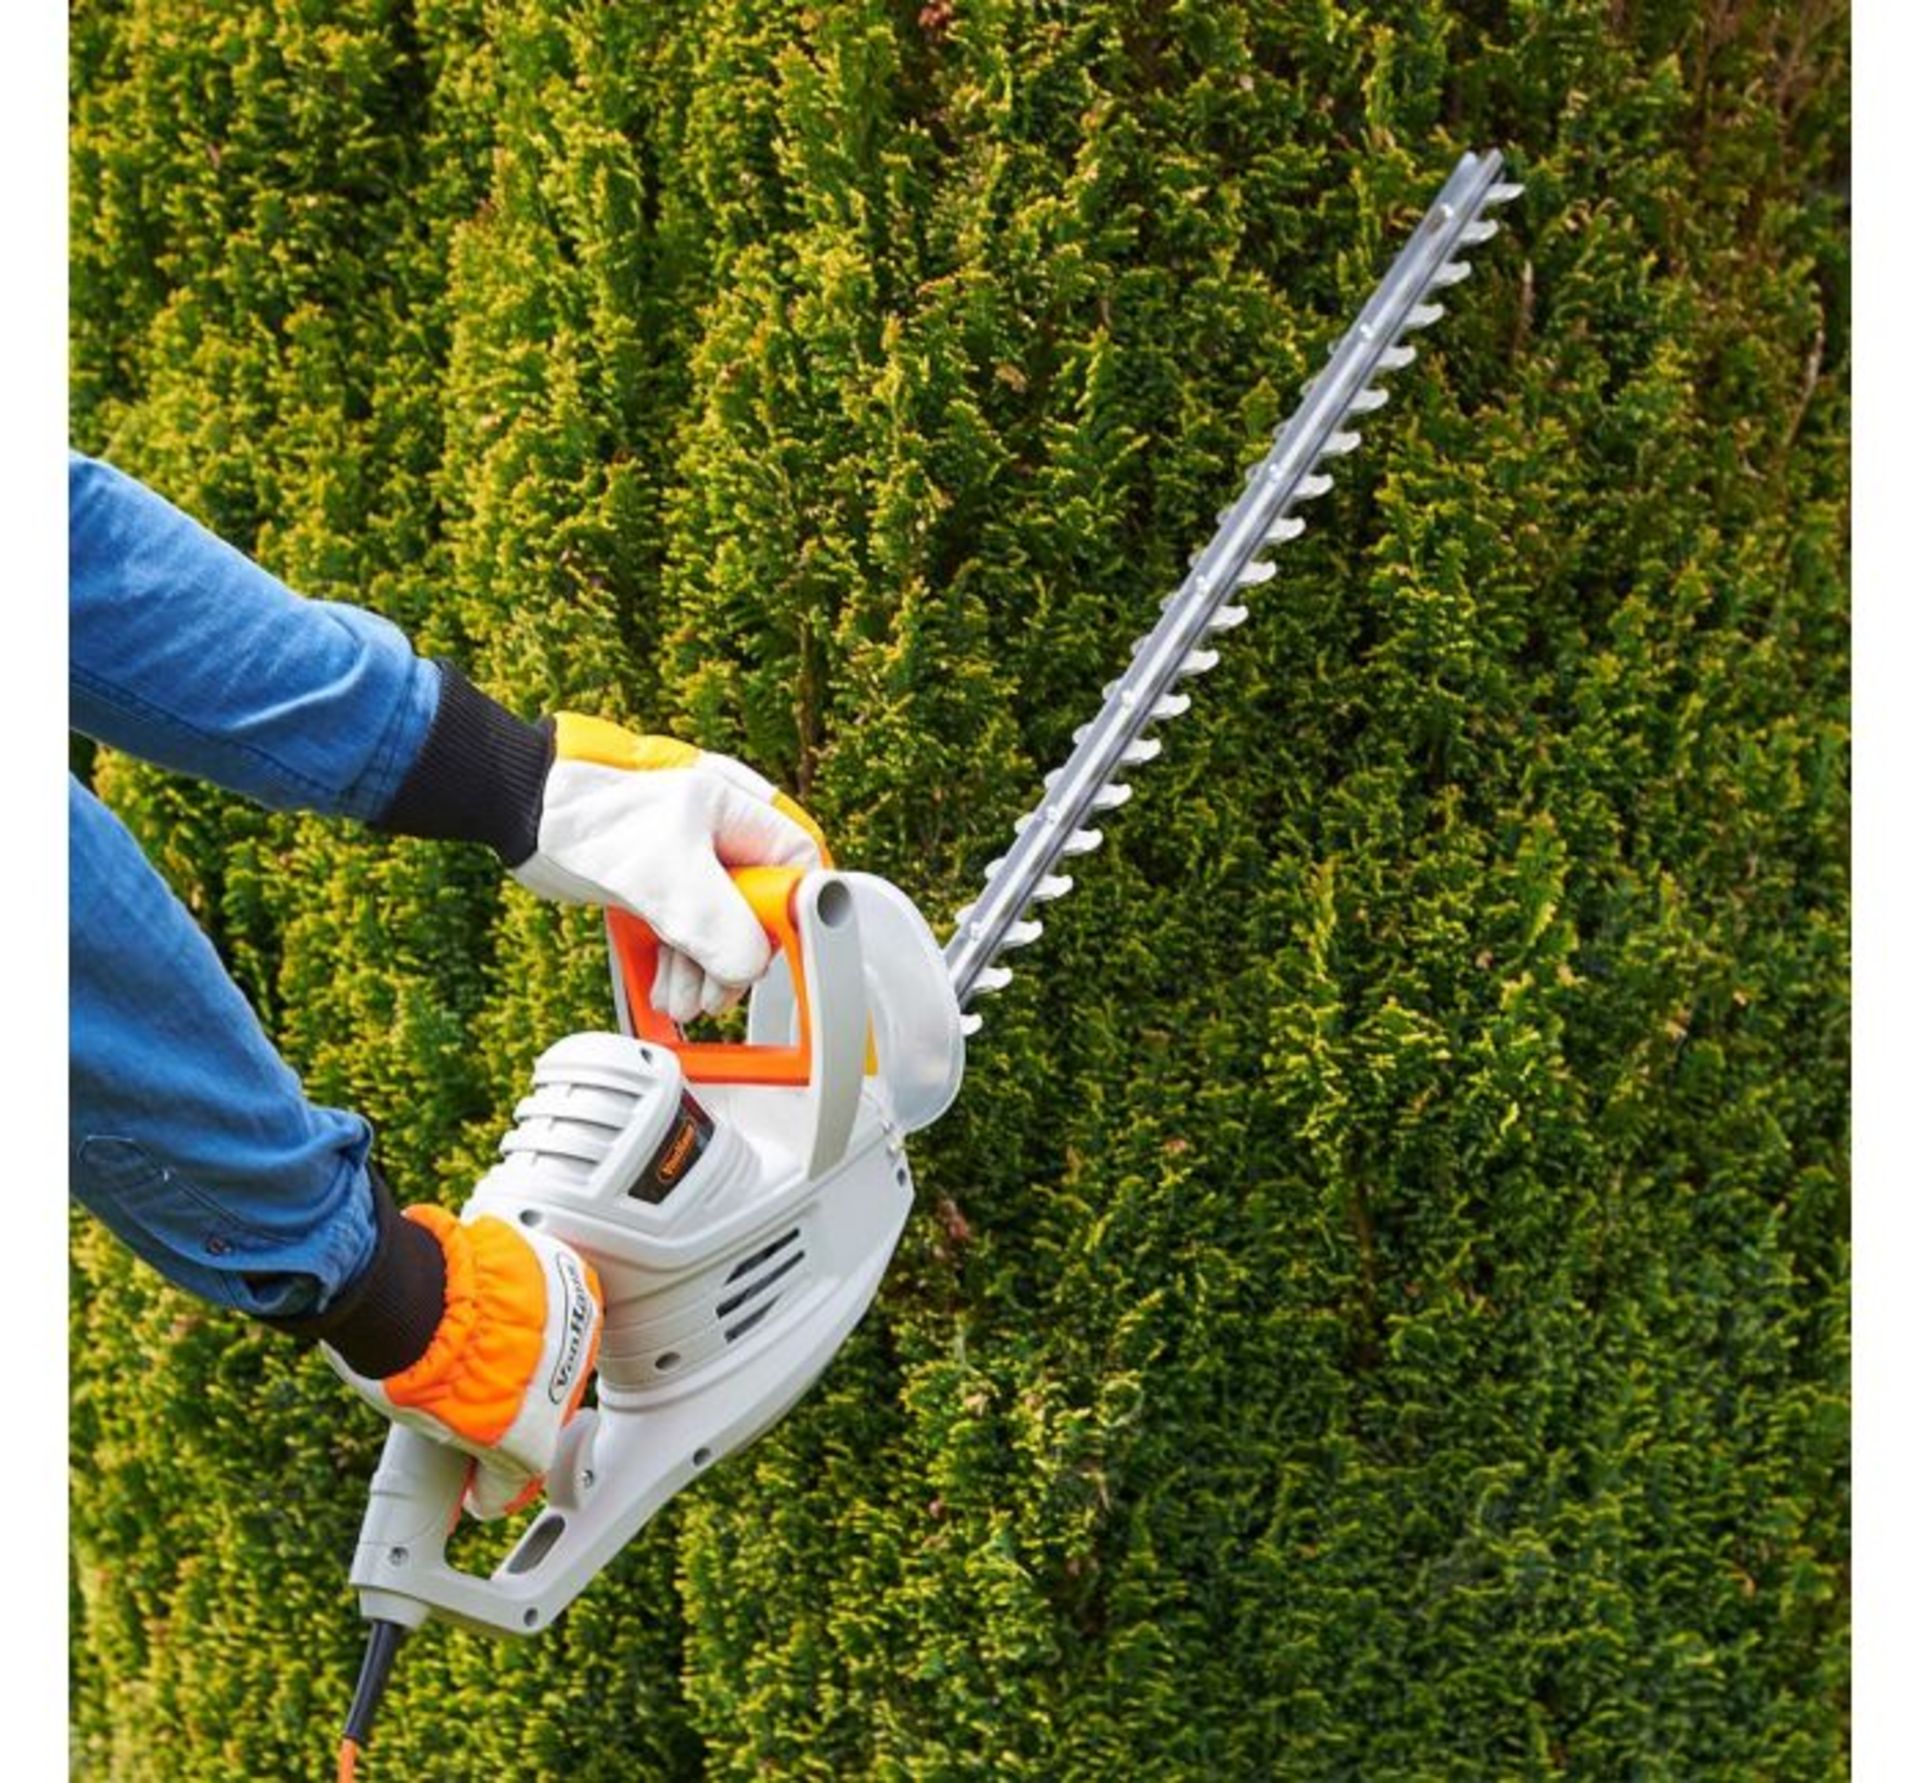 (VL2) 550W Hedge Trimmer Lightweight at only 3.2kg with a powerful 550W motor and pre...